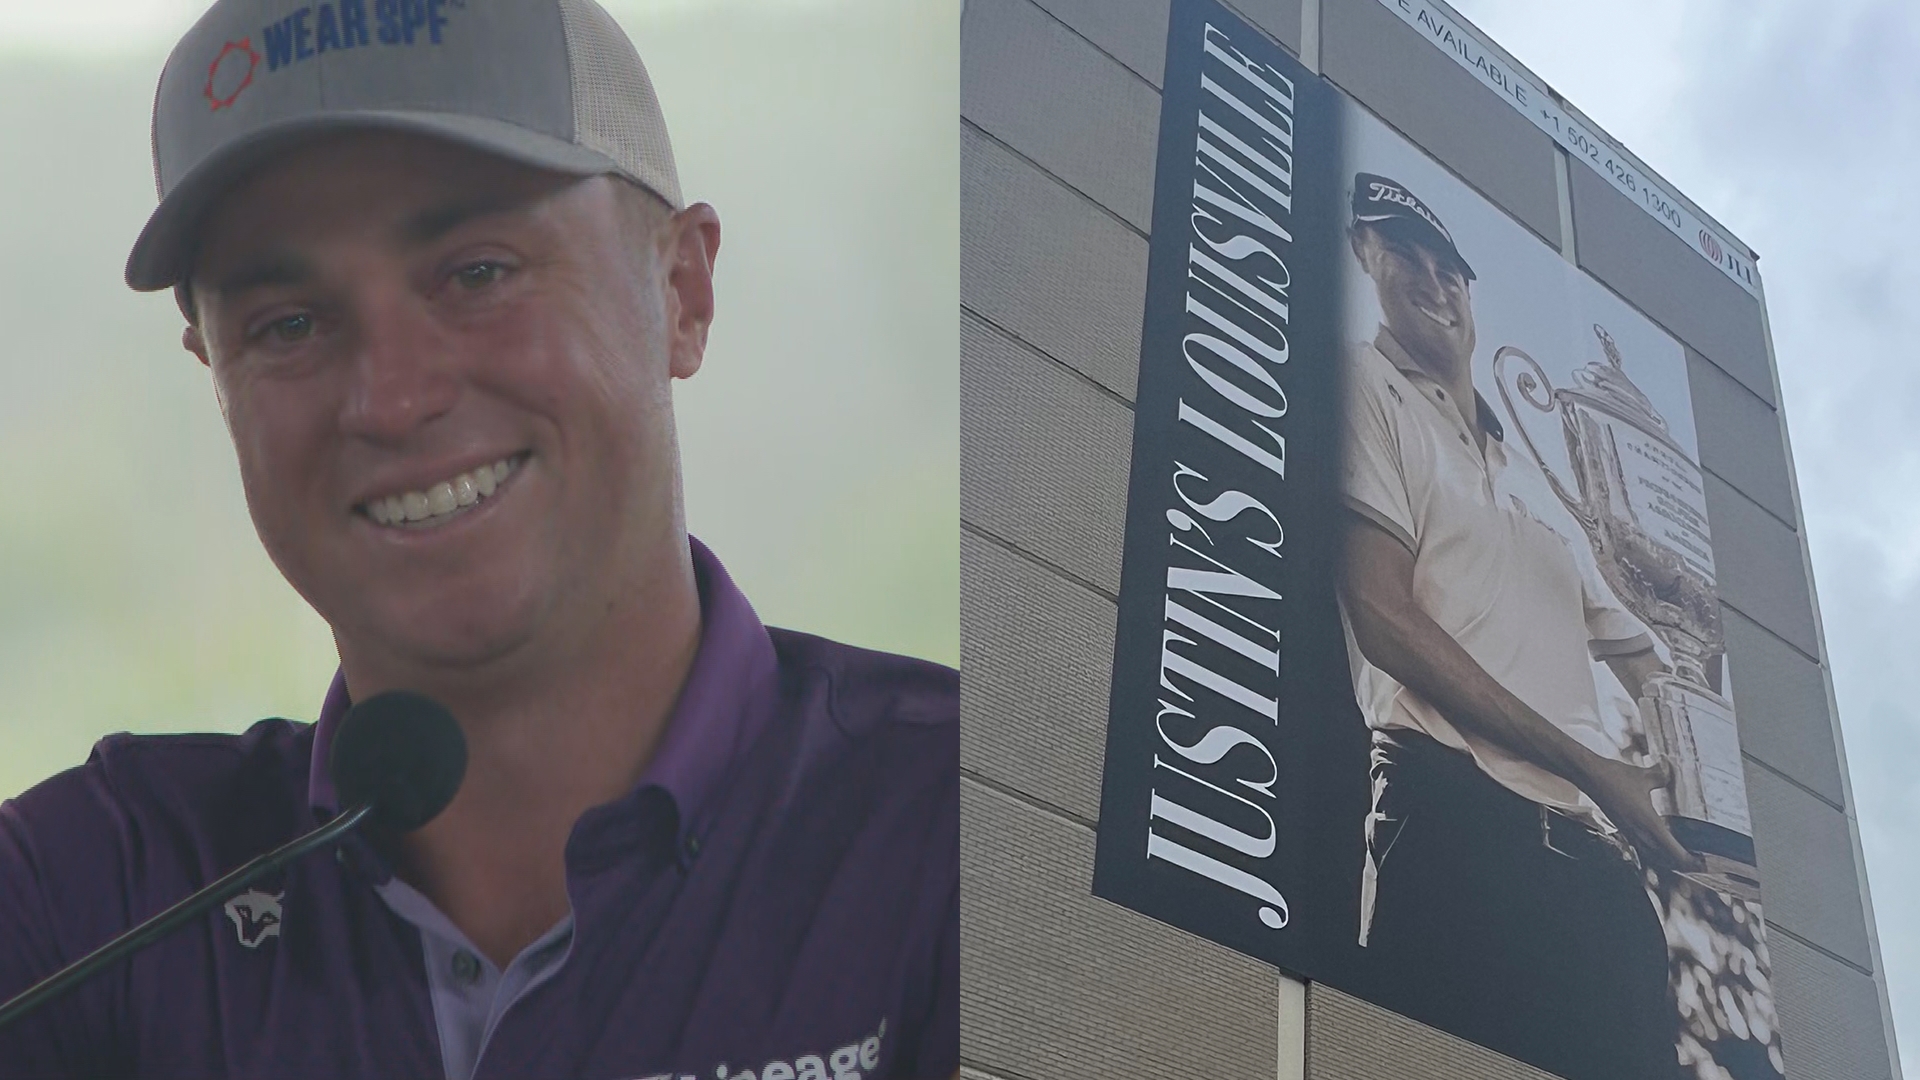 Justin Thomas, a two-time PGA Champion, said no golf tournament has made him feel the way he did on Monday after receiving a 'Hometown Hero' banner in Louisville.